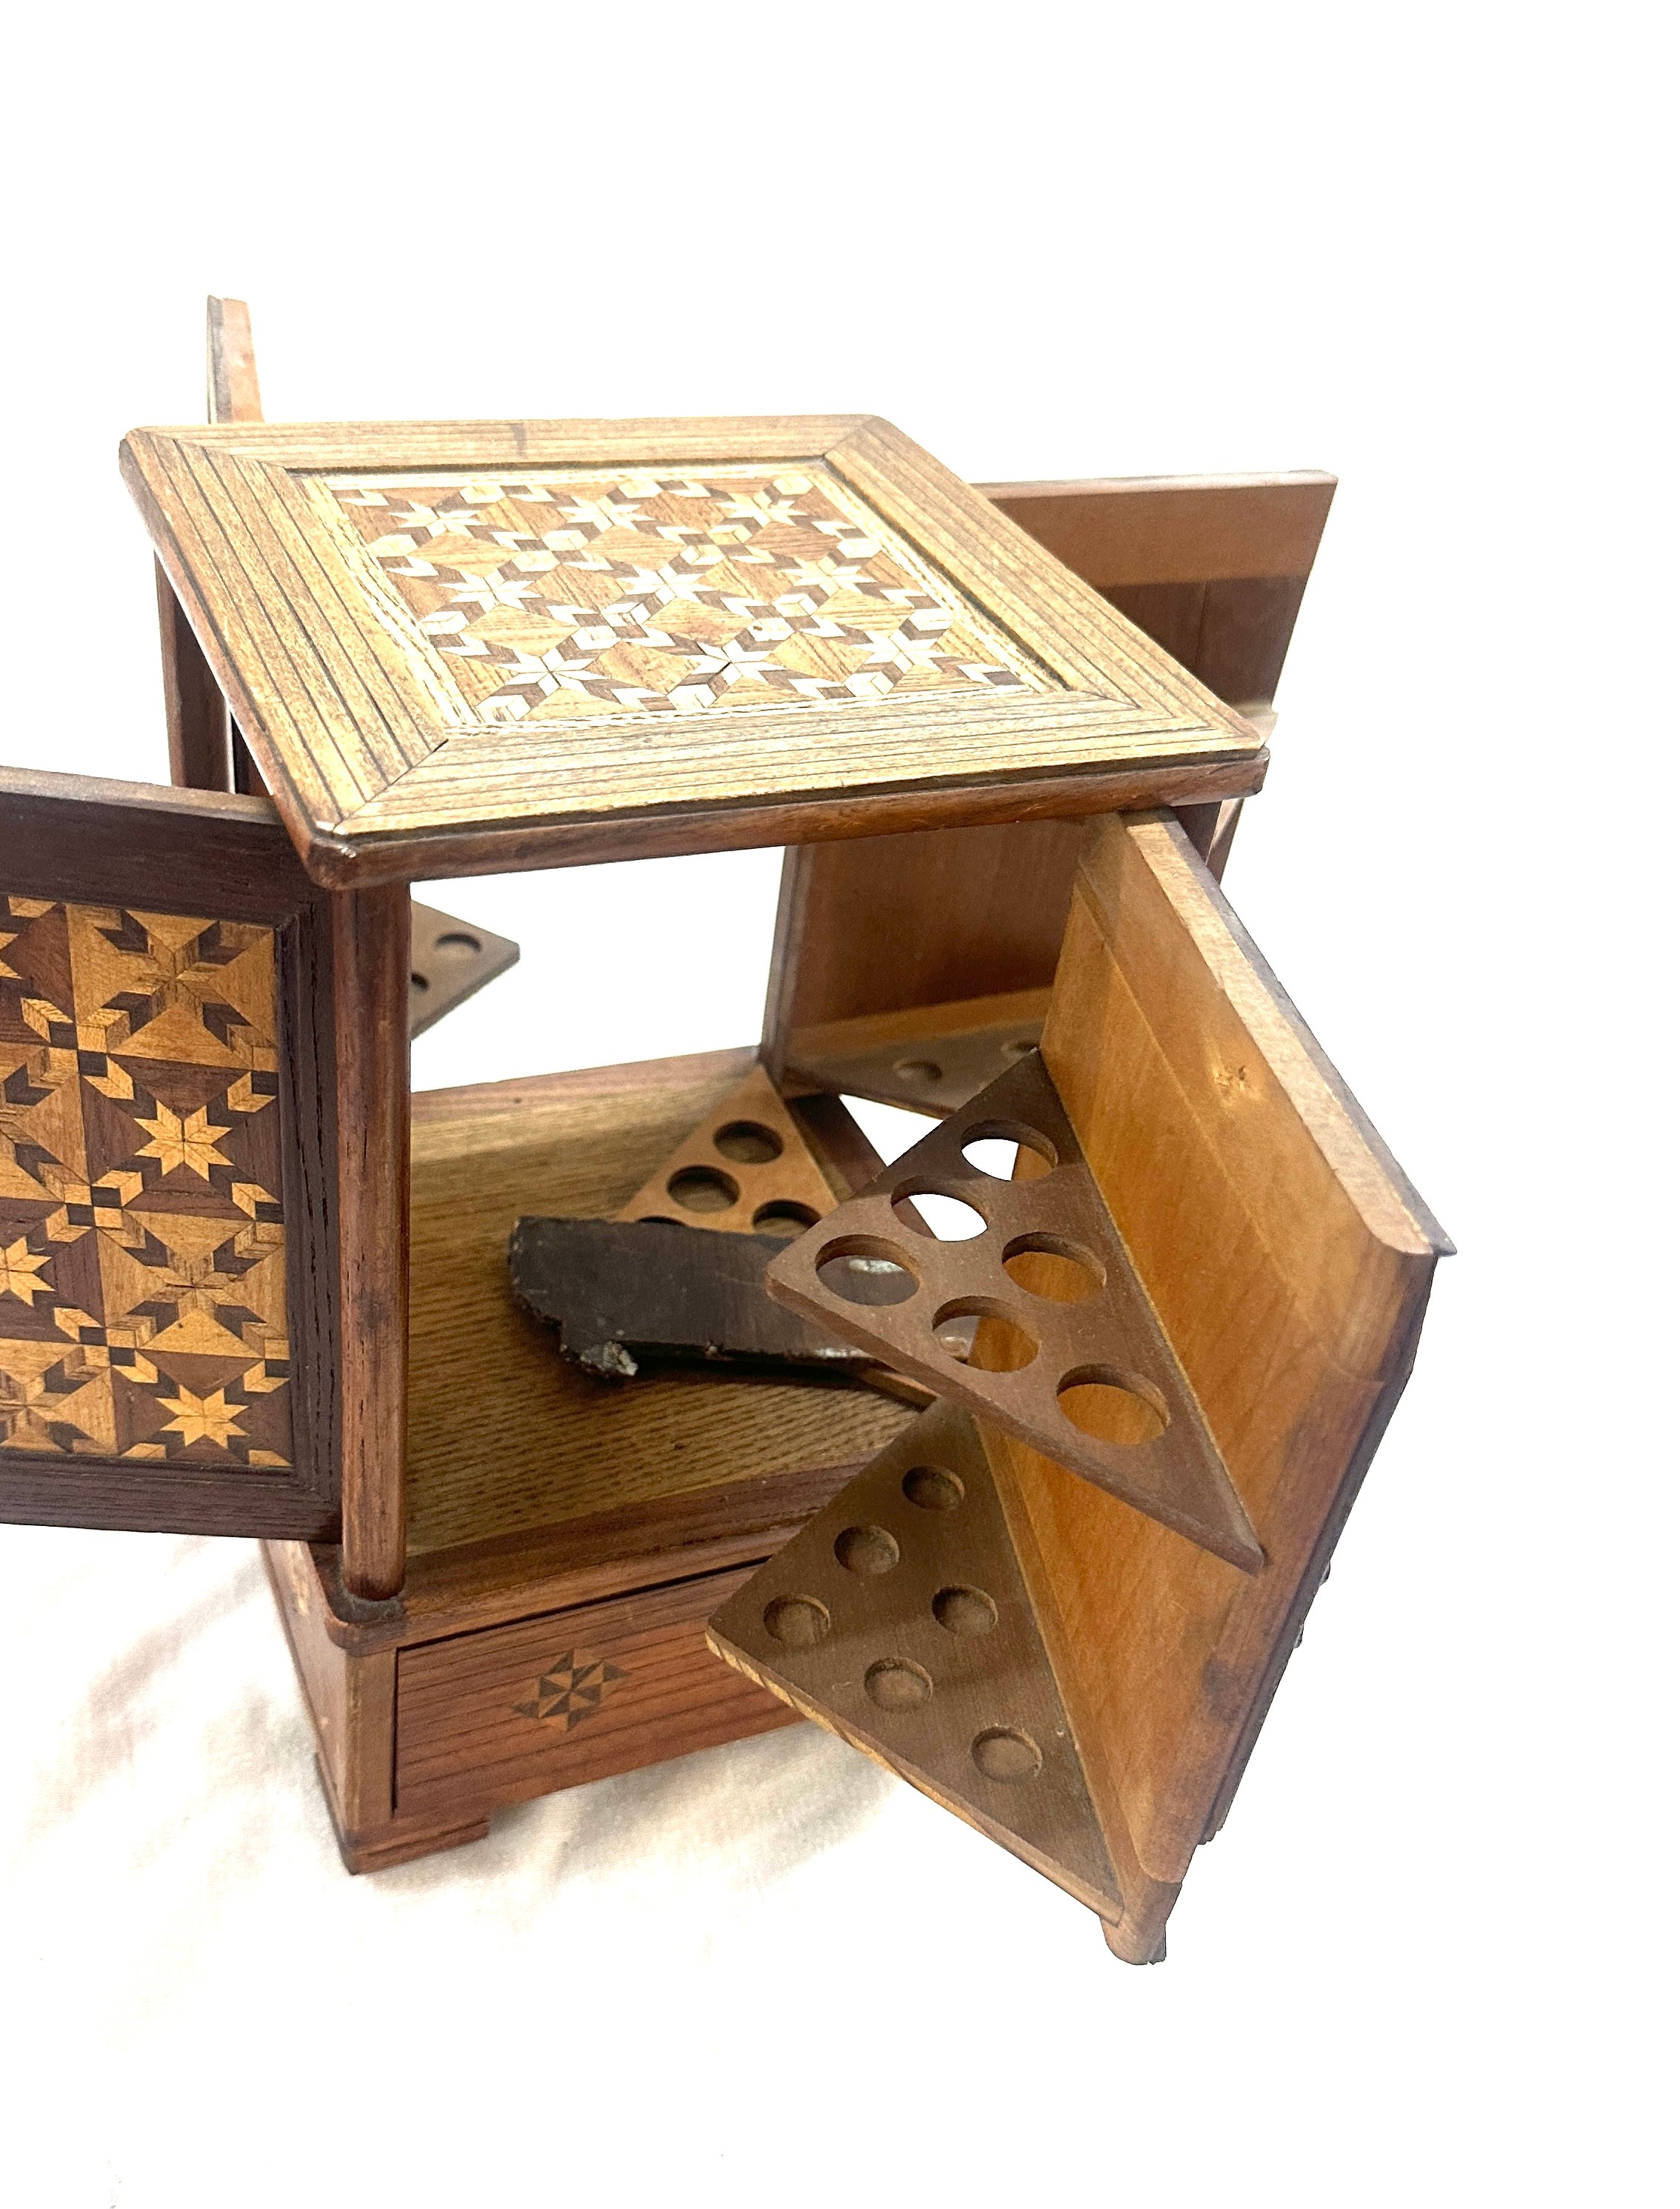 Inlaid pipe rack box measures approx 60 inches square by 10 inches tall - Bild 4 aus 6